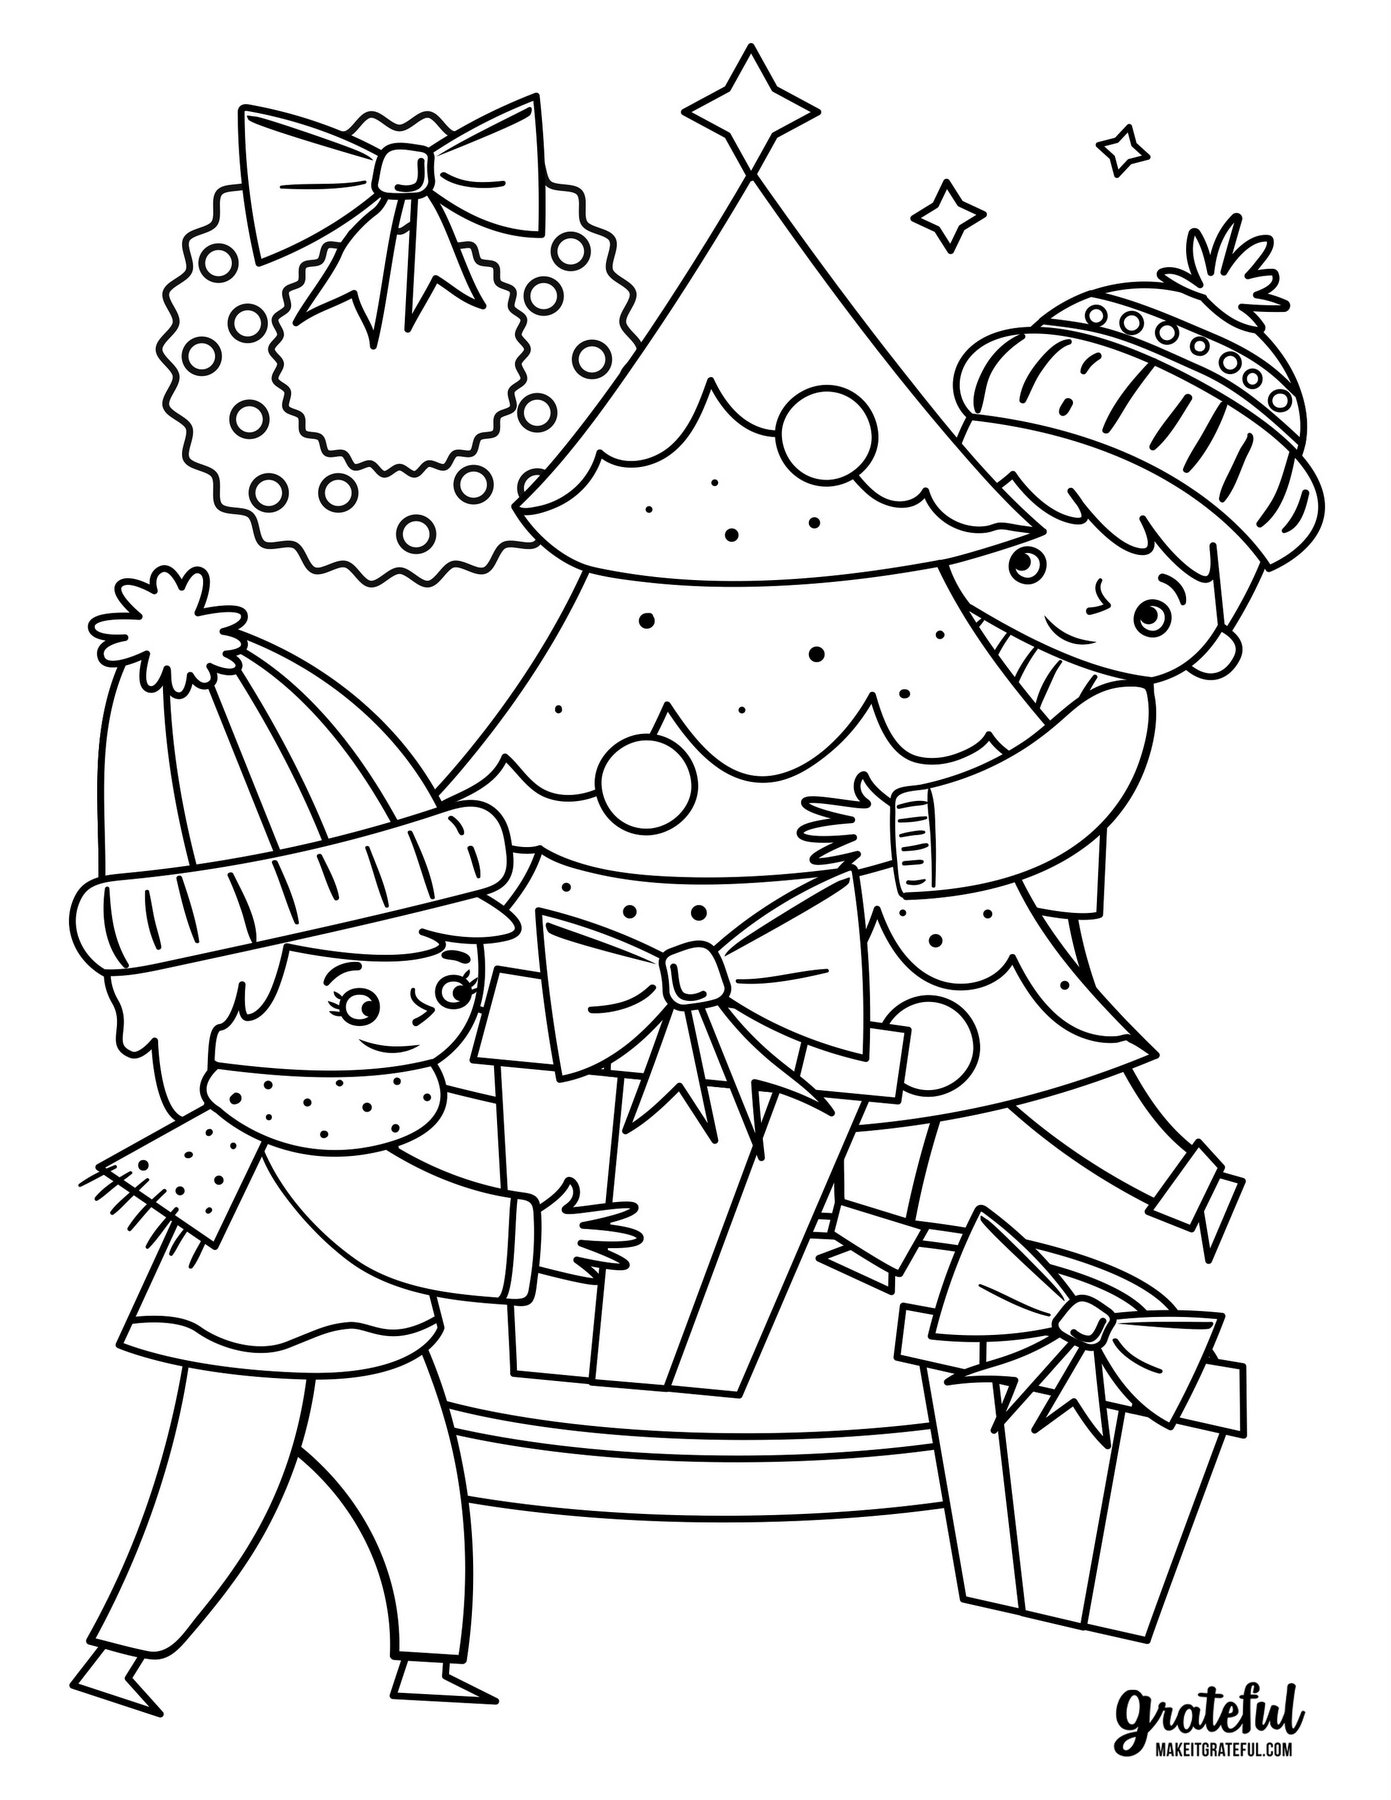 20 Christmas coloring pages your kids will love